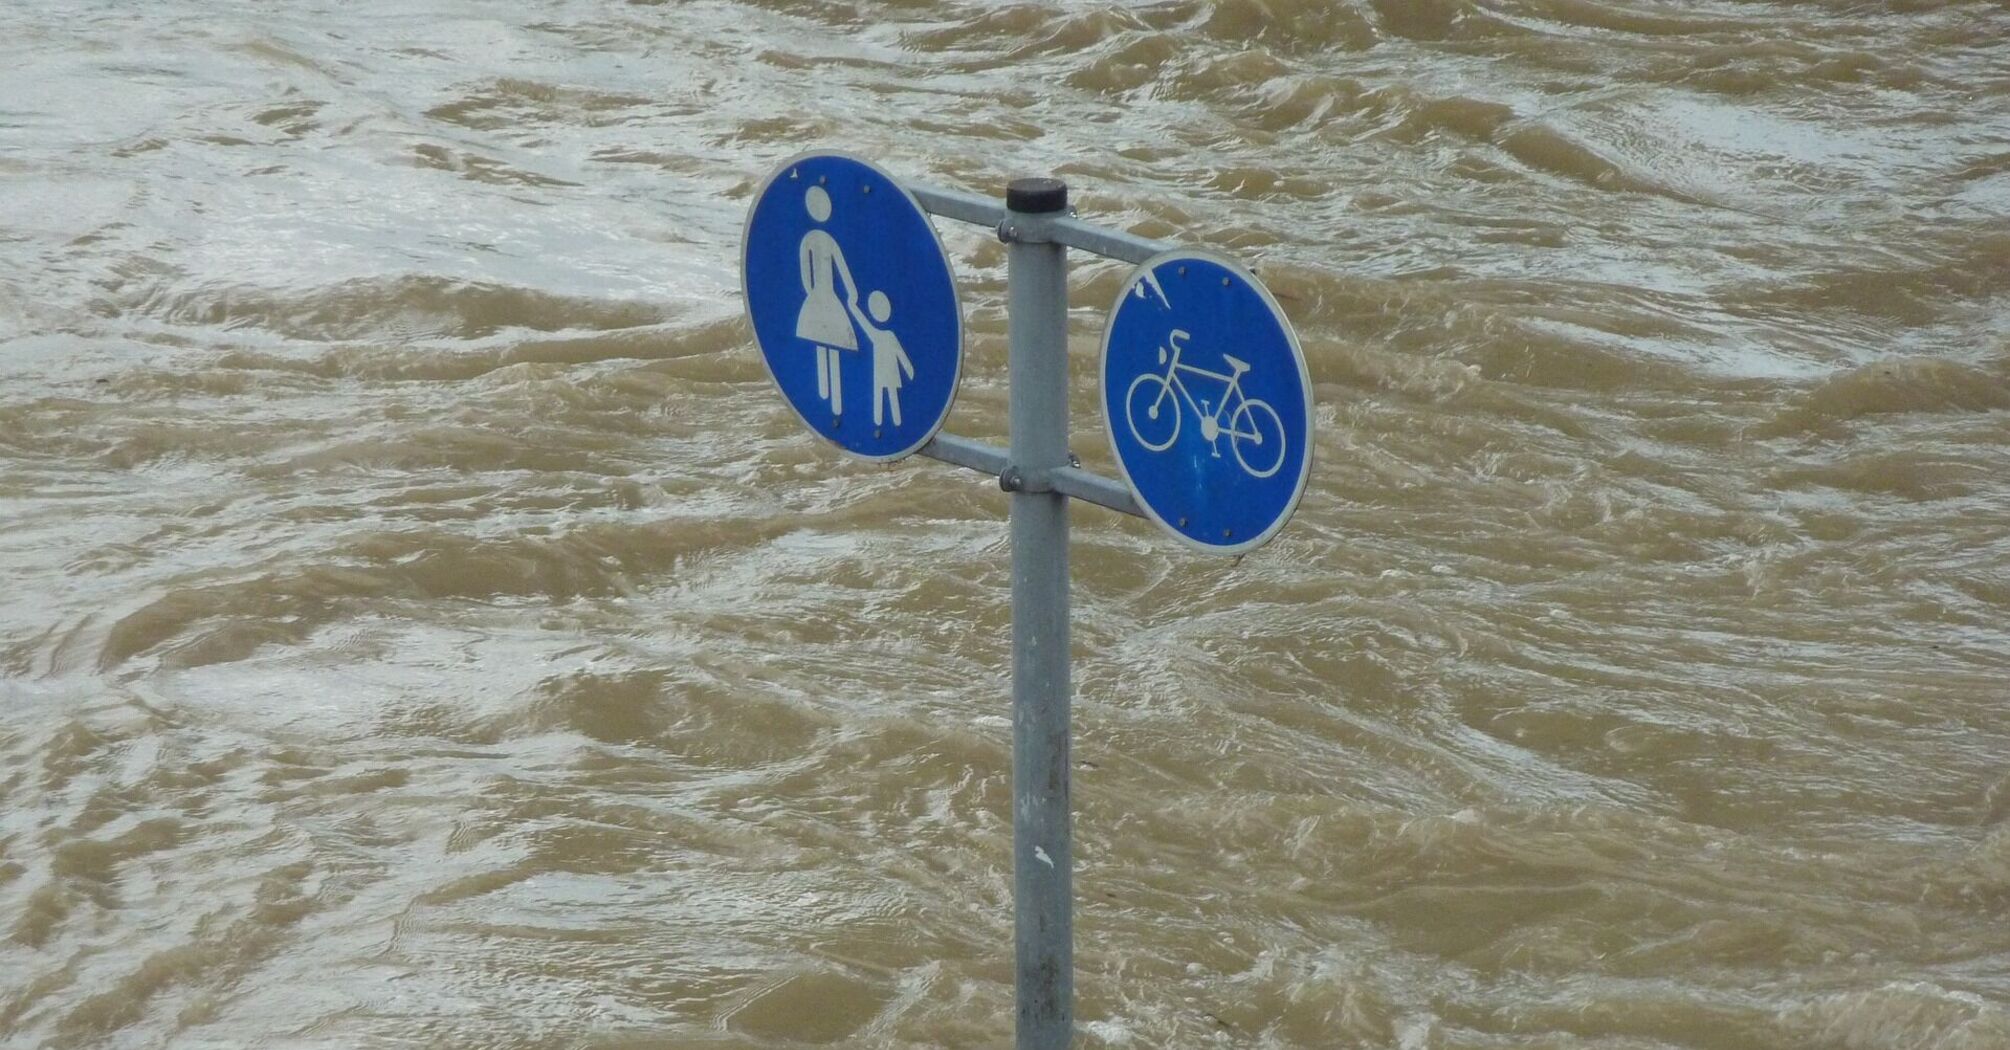 Traffic signs submerged in floodwater indicating pedestrian and bicycle paths